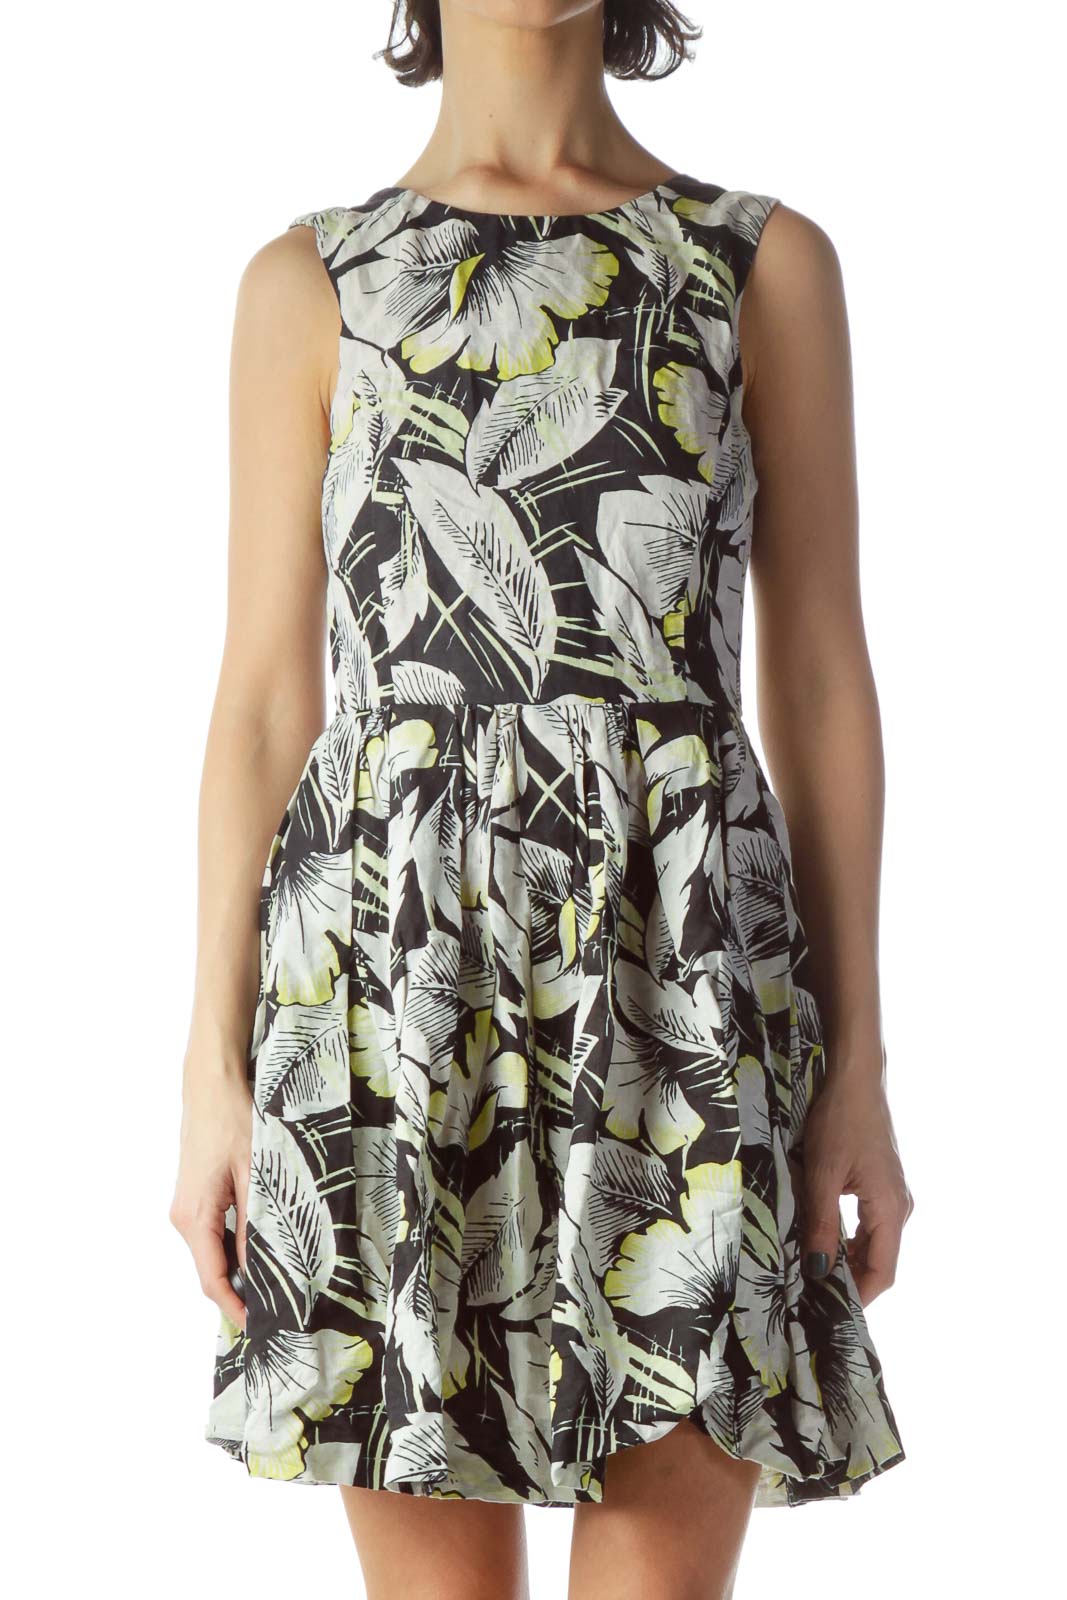 Black Gray Yellow Floral Print Flared Day Dress Front